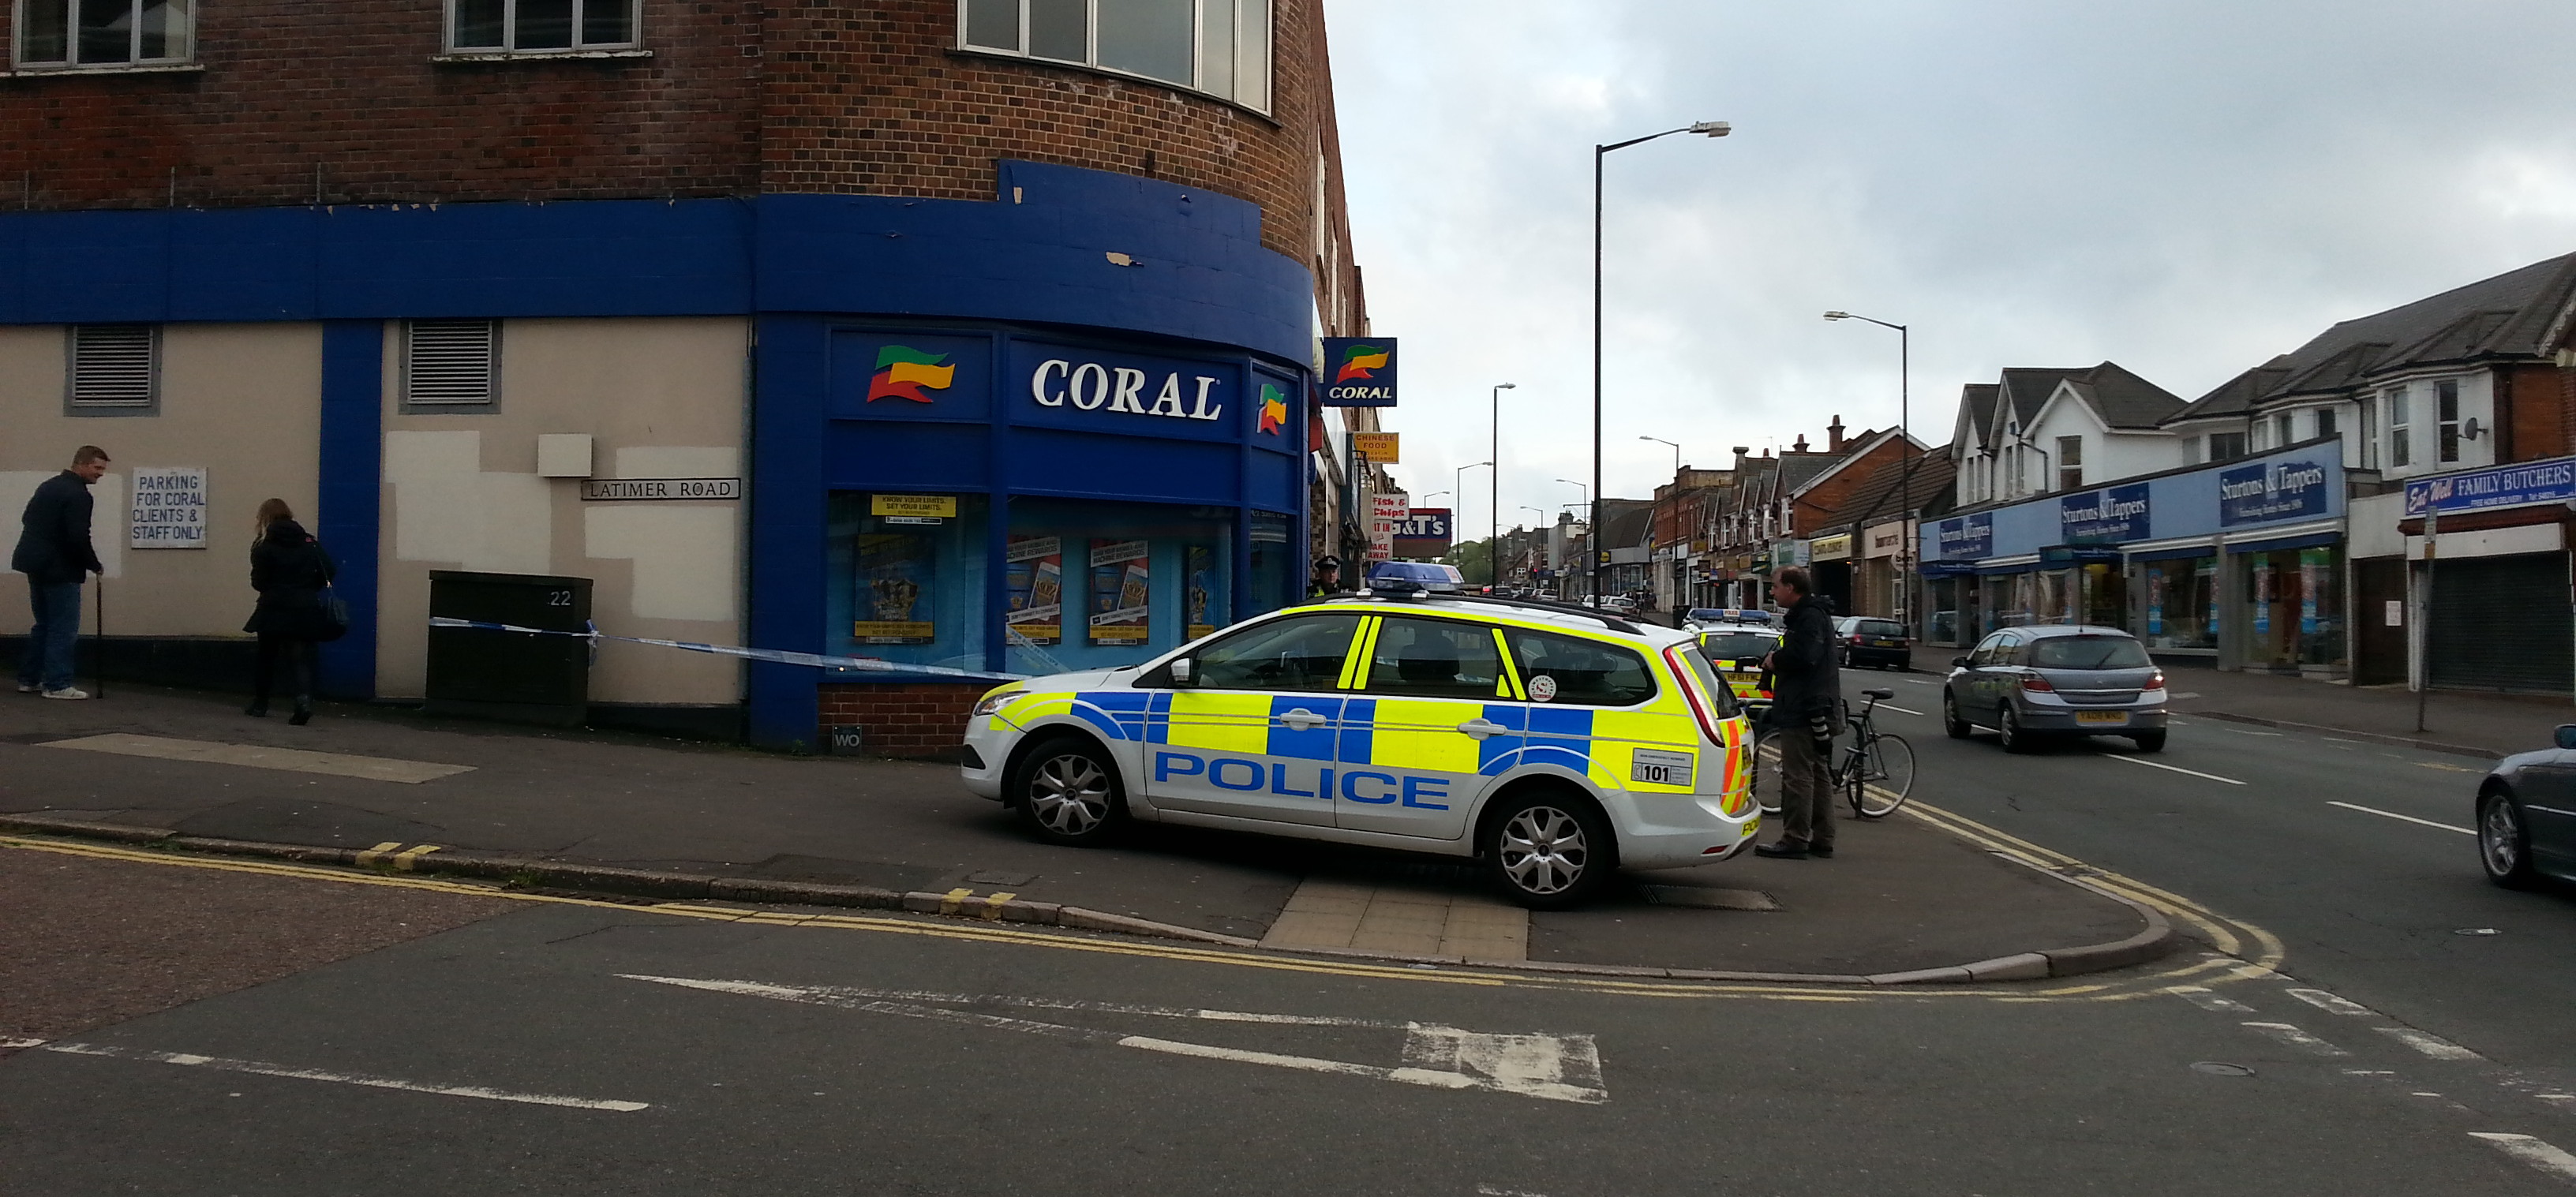 A robbery has taken place at a betting shop in Winton